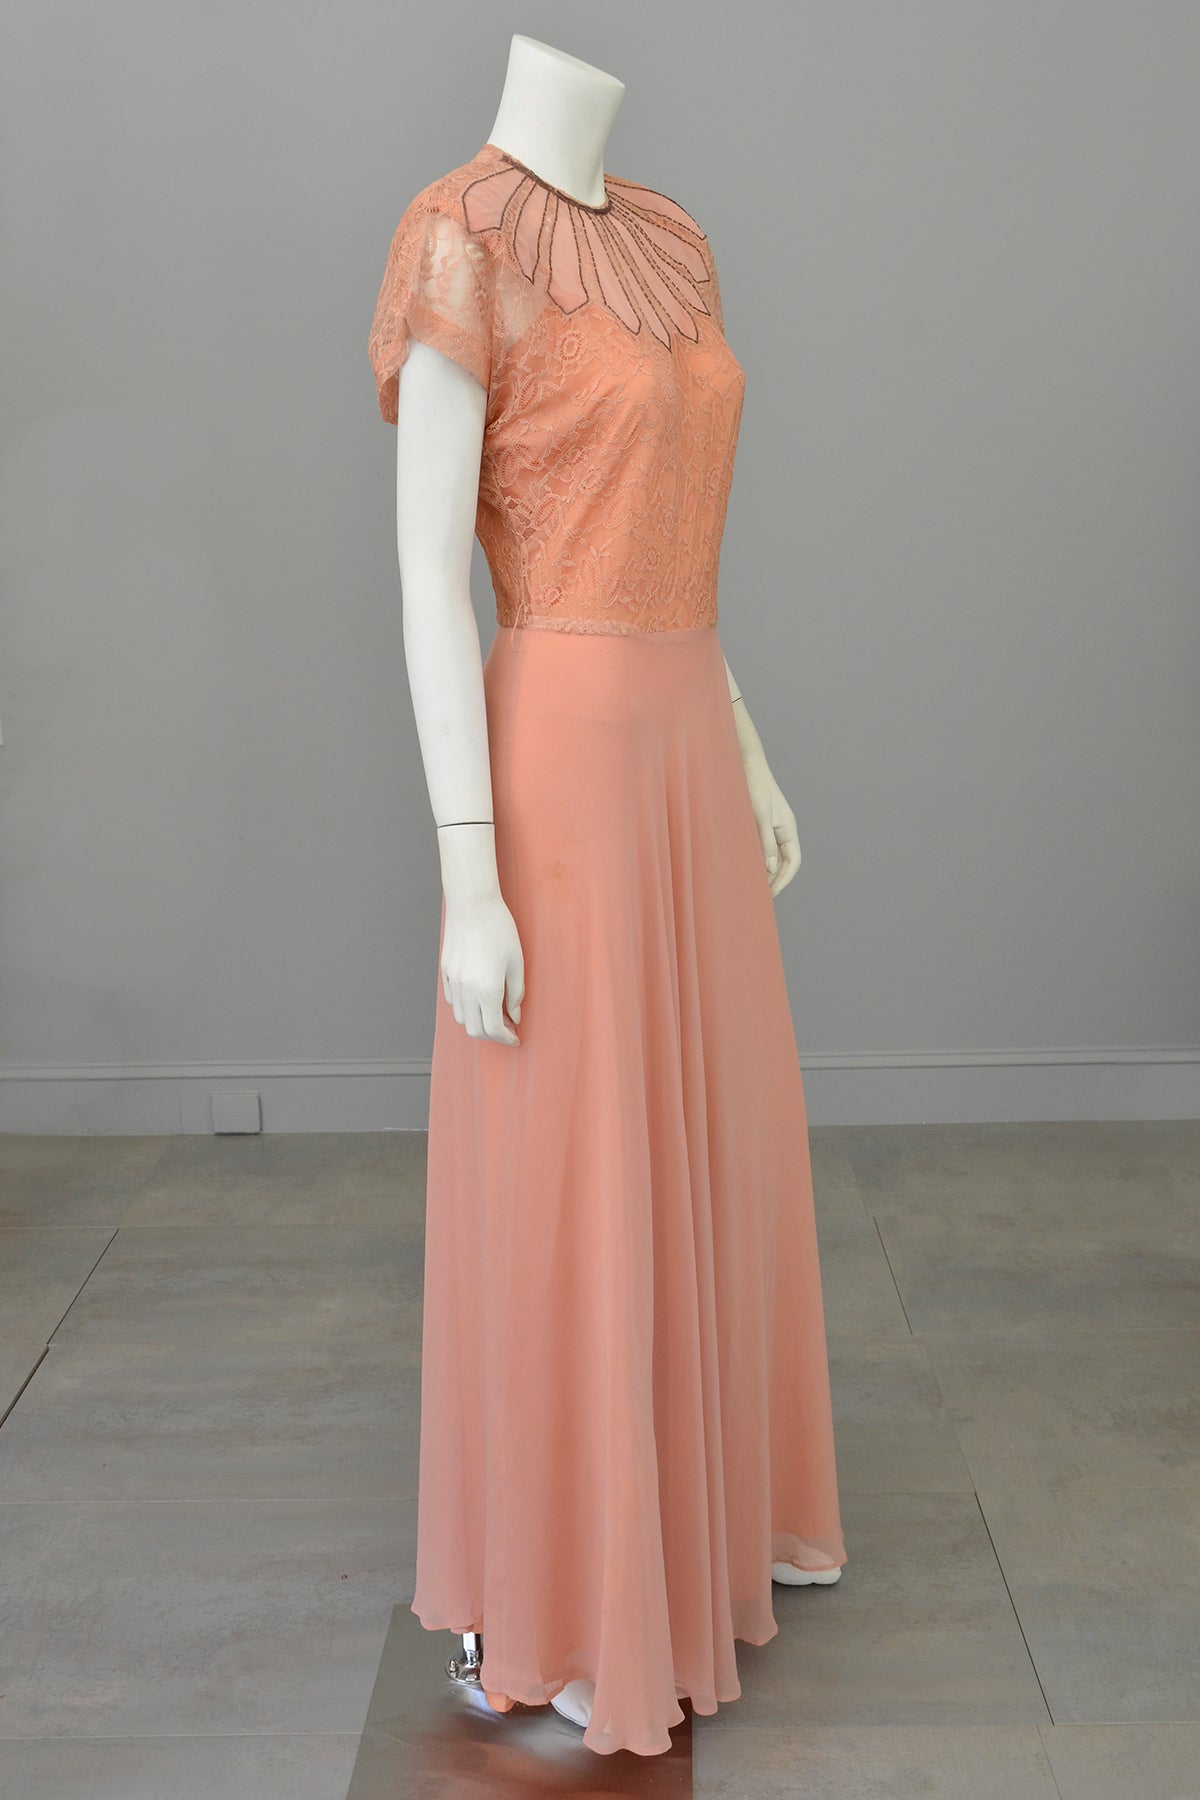 1930s Peach Art Deco Beaded Lace Gown